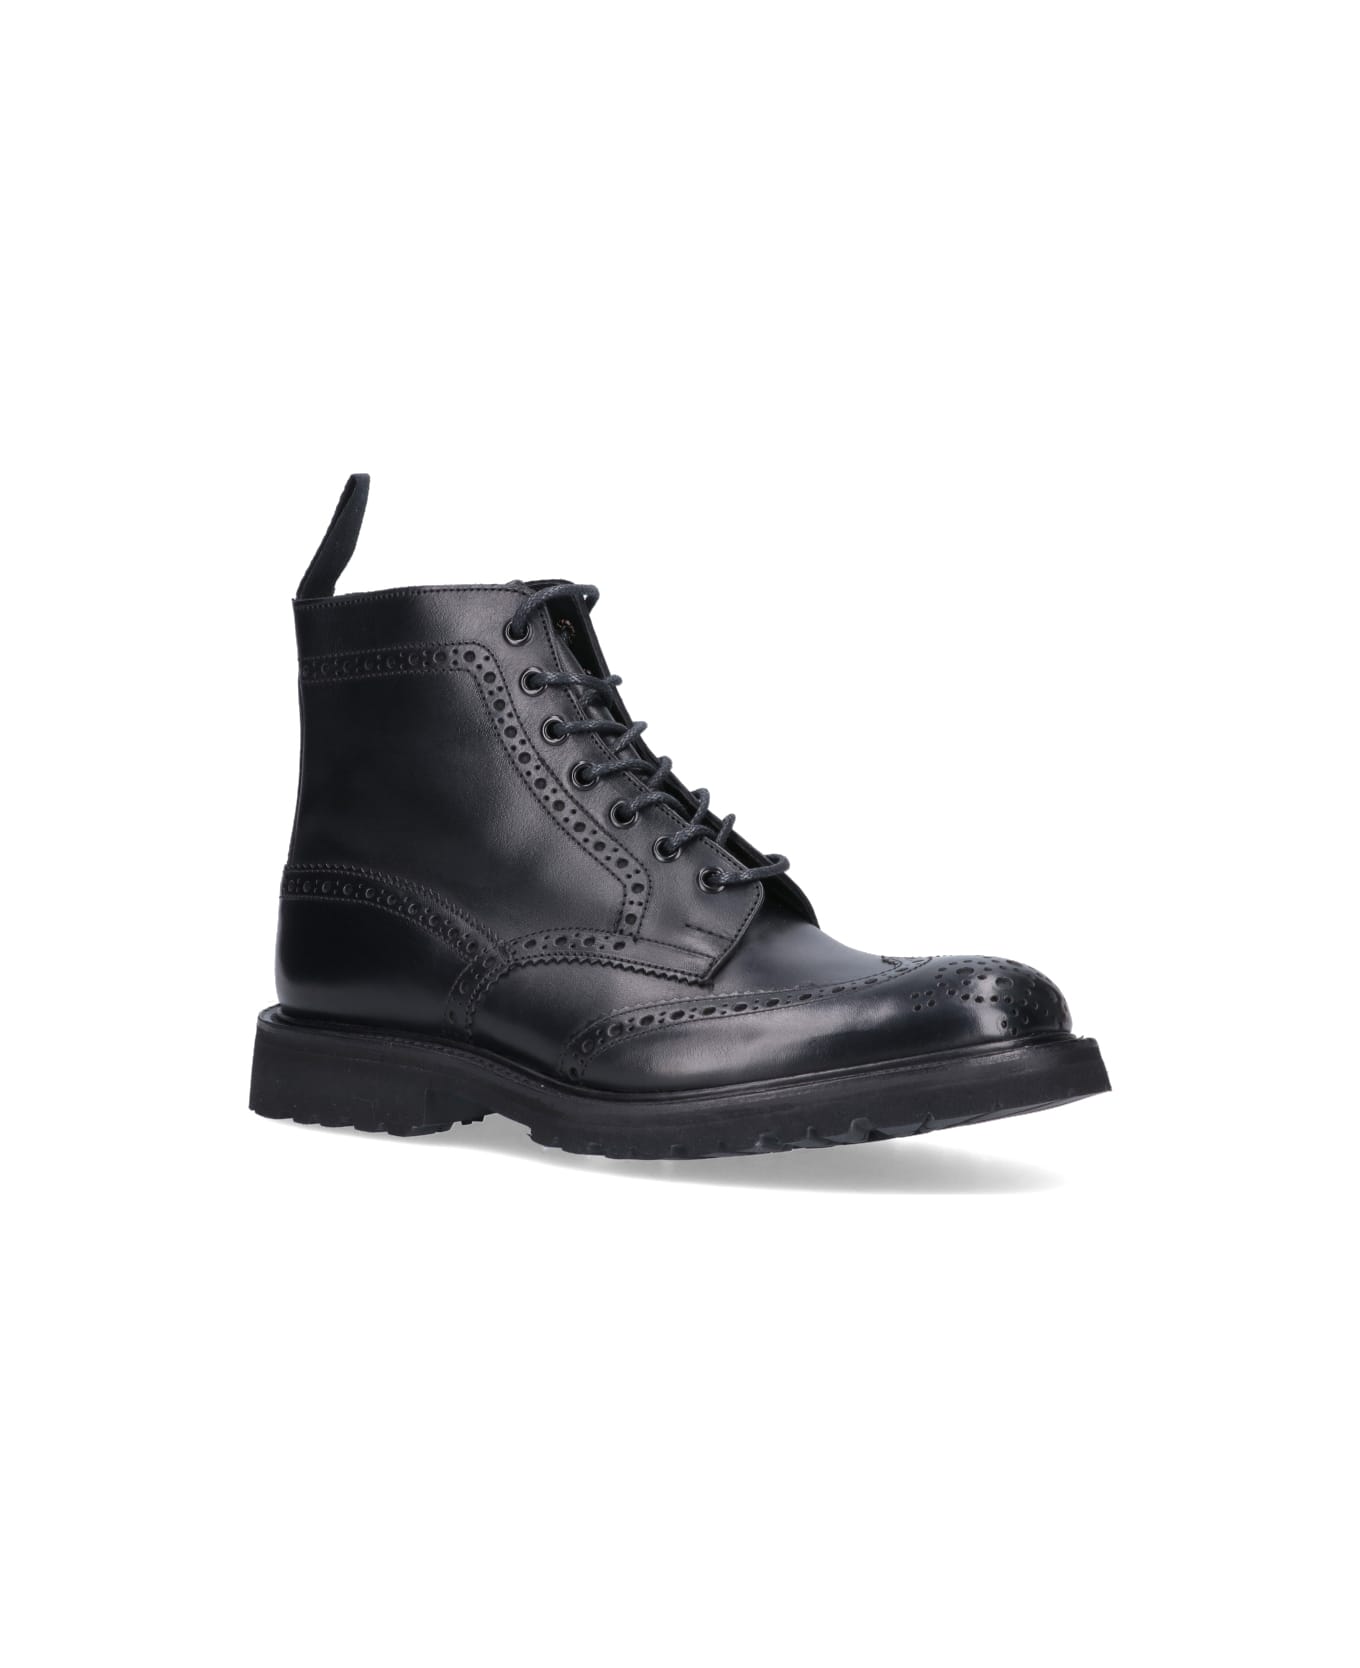 Tricker's Ankle Boots "stow" - Black   ブーツ